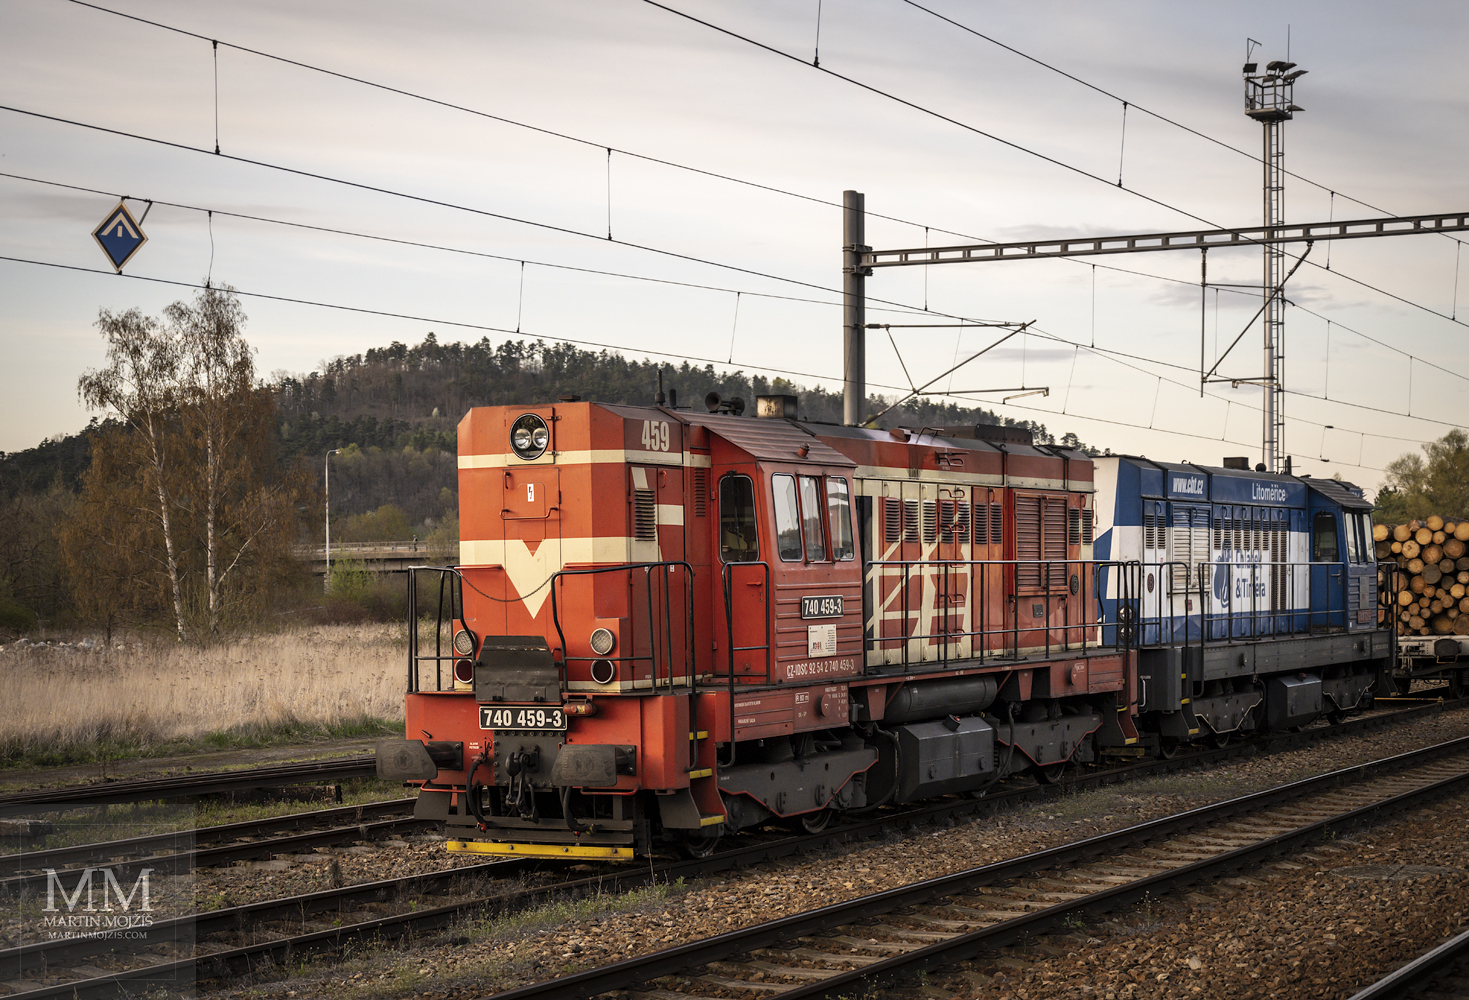 A pair of diesel-electric shunting locomotives, led by 740 459-3 IDS Cargo.